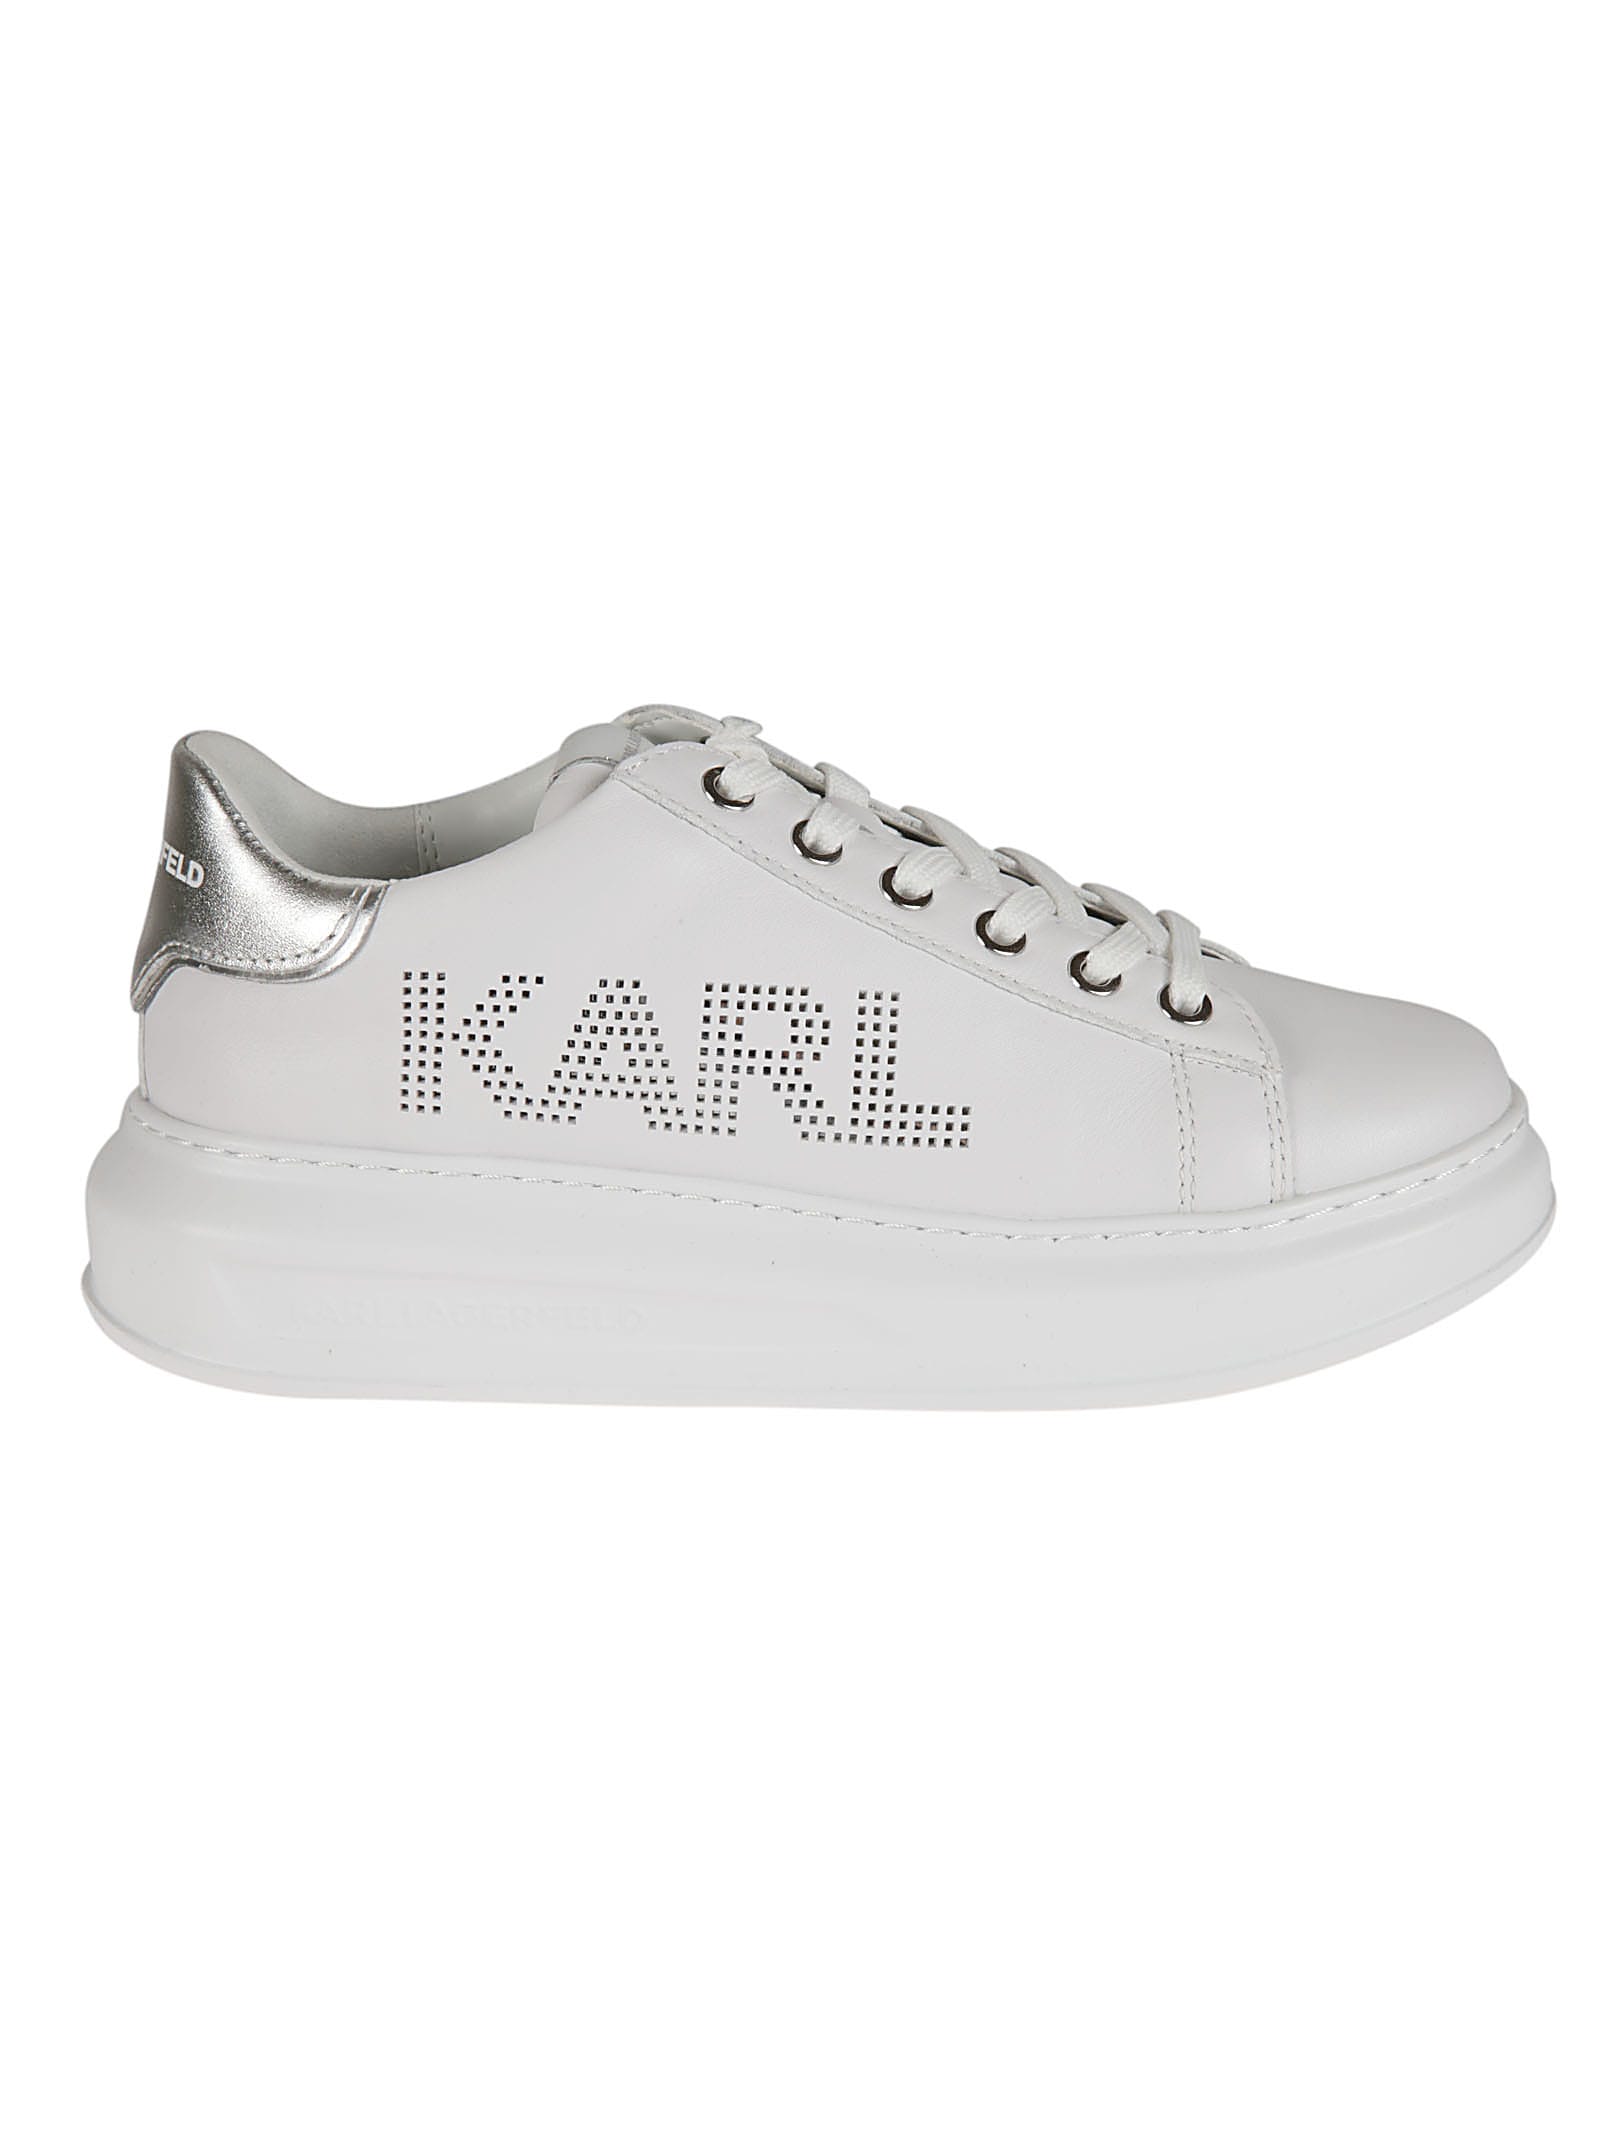 Buy Karl Lagerfeld Karl Punkt Logo Sneakers online, shop Karl Lagerfeld shoes with free shipping